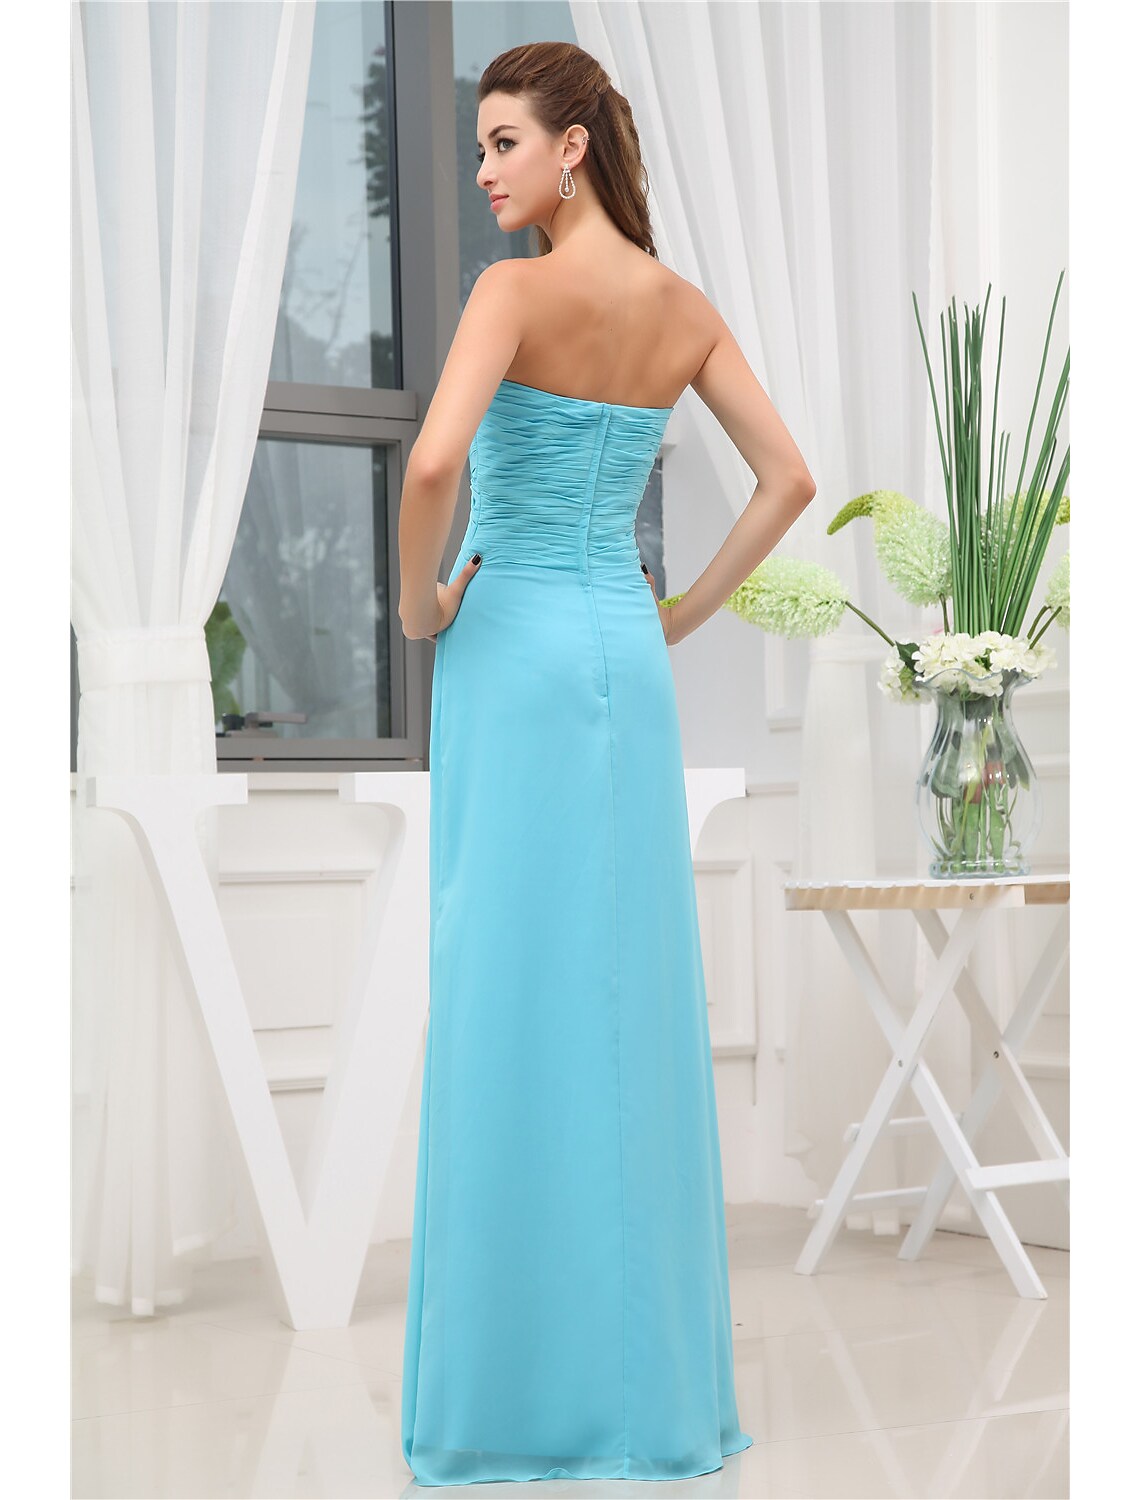 A-Line Evening Gown Elegant Floor Length Sleeveless Chiffon with Pleats Ruched